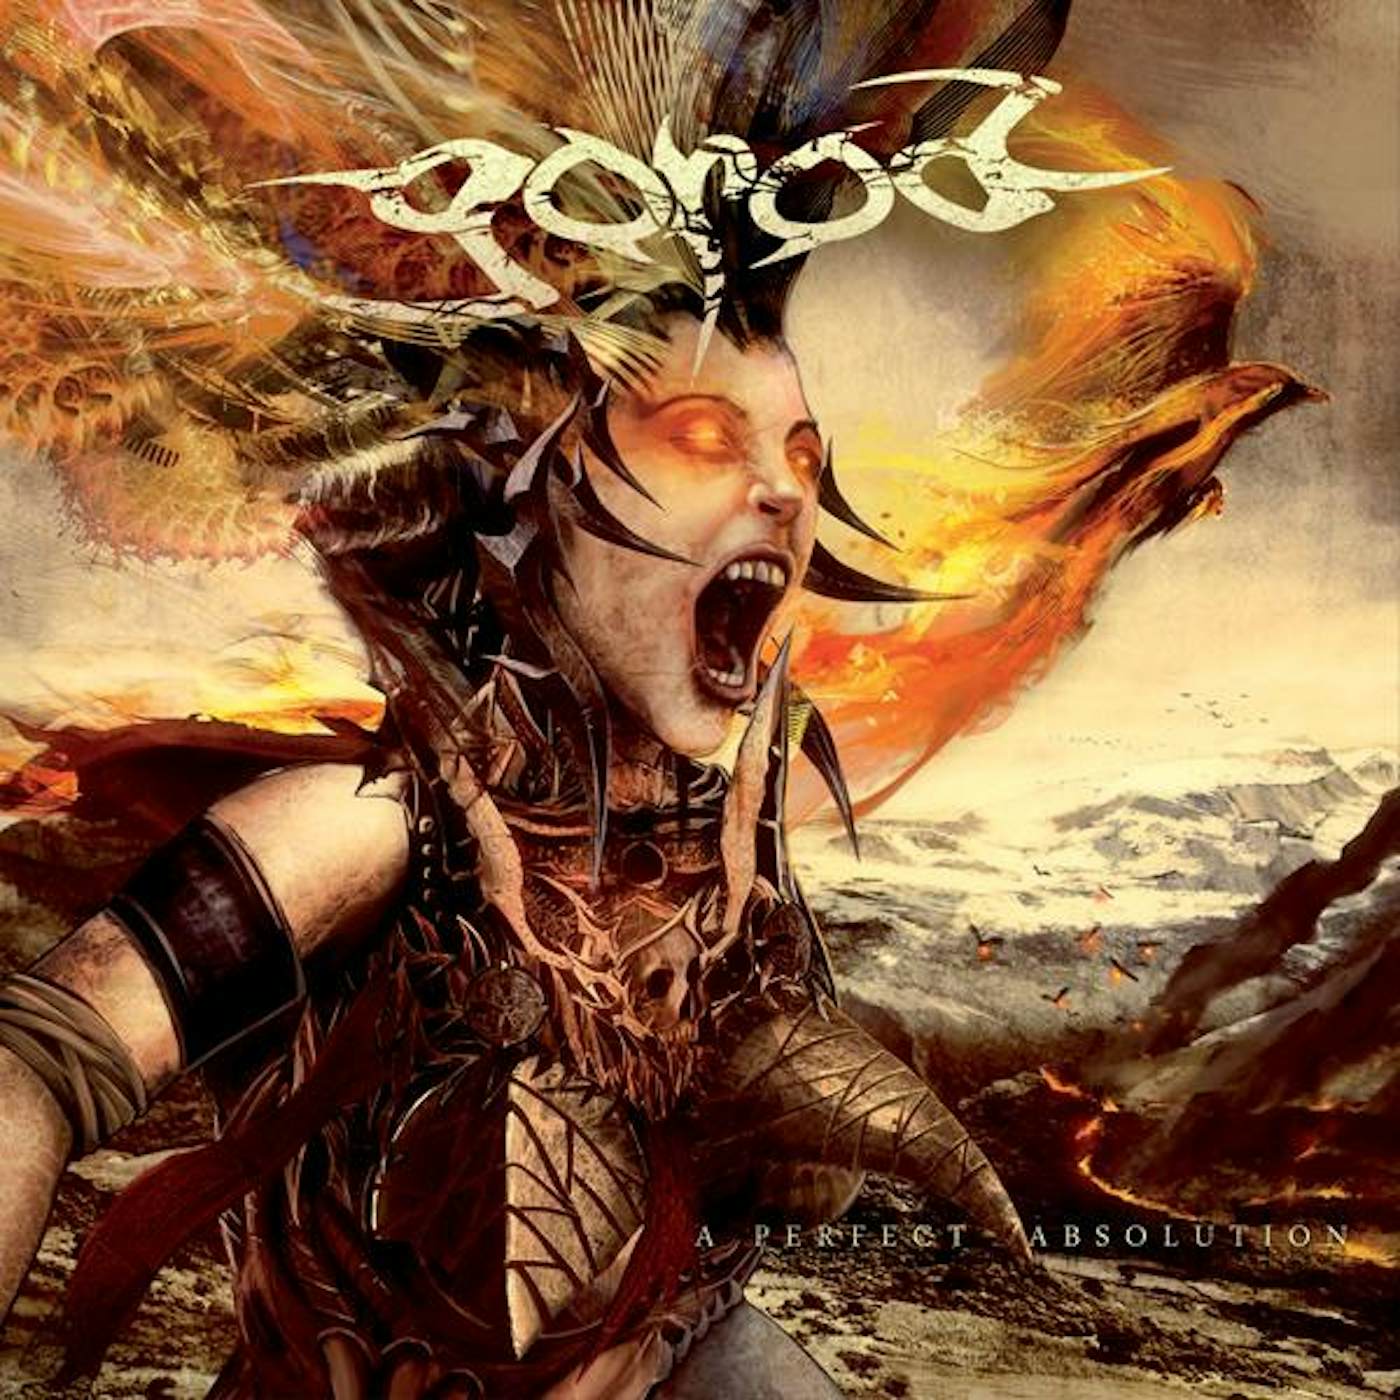 Gorod "A Perfect Absolution" 12"